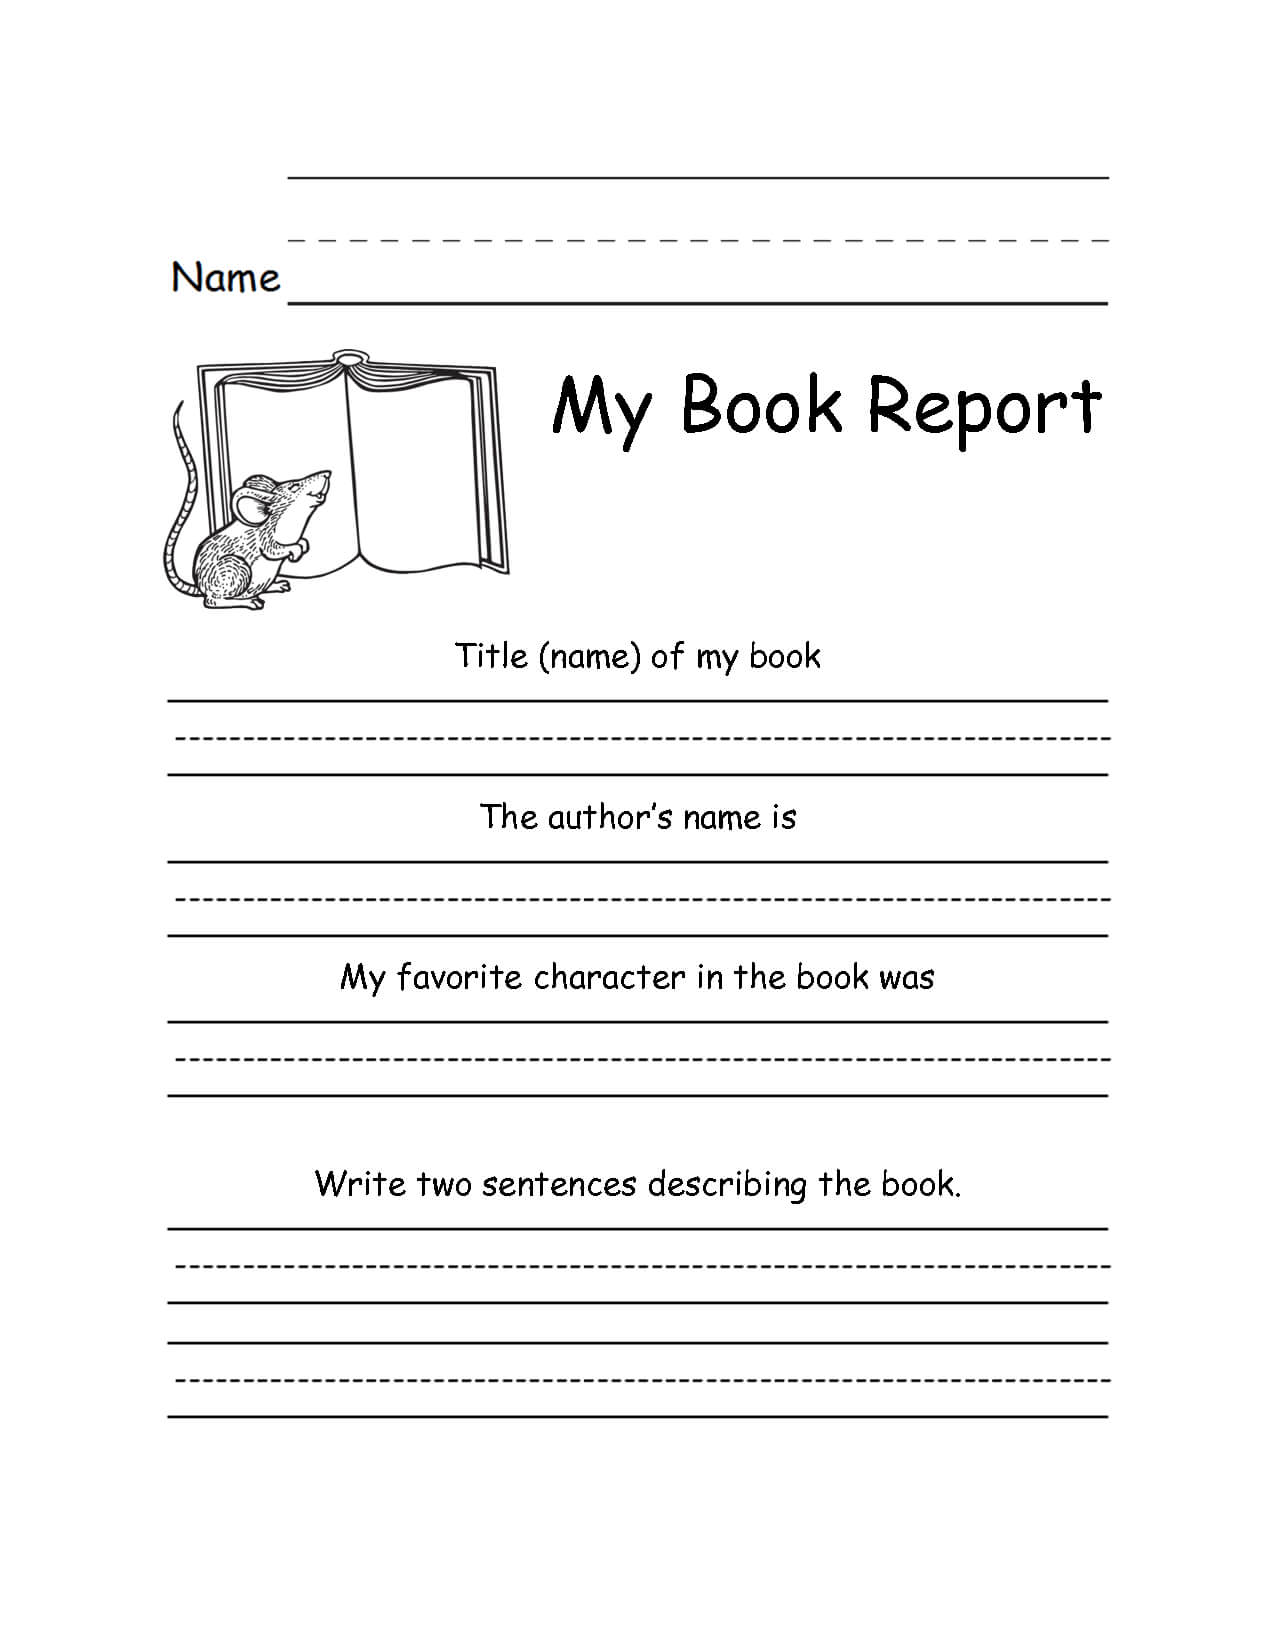 research-paper-free-grader-3rd-grade-writing-floss-ceolpub-in-report